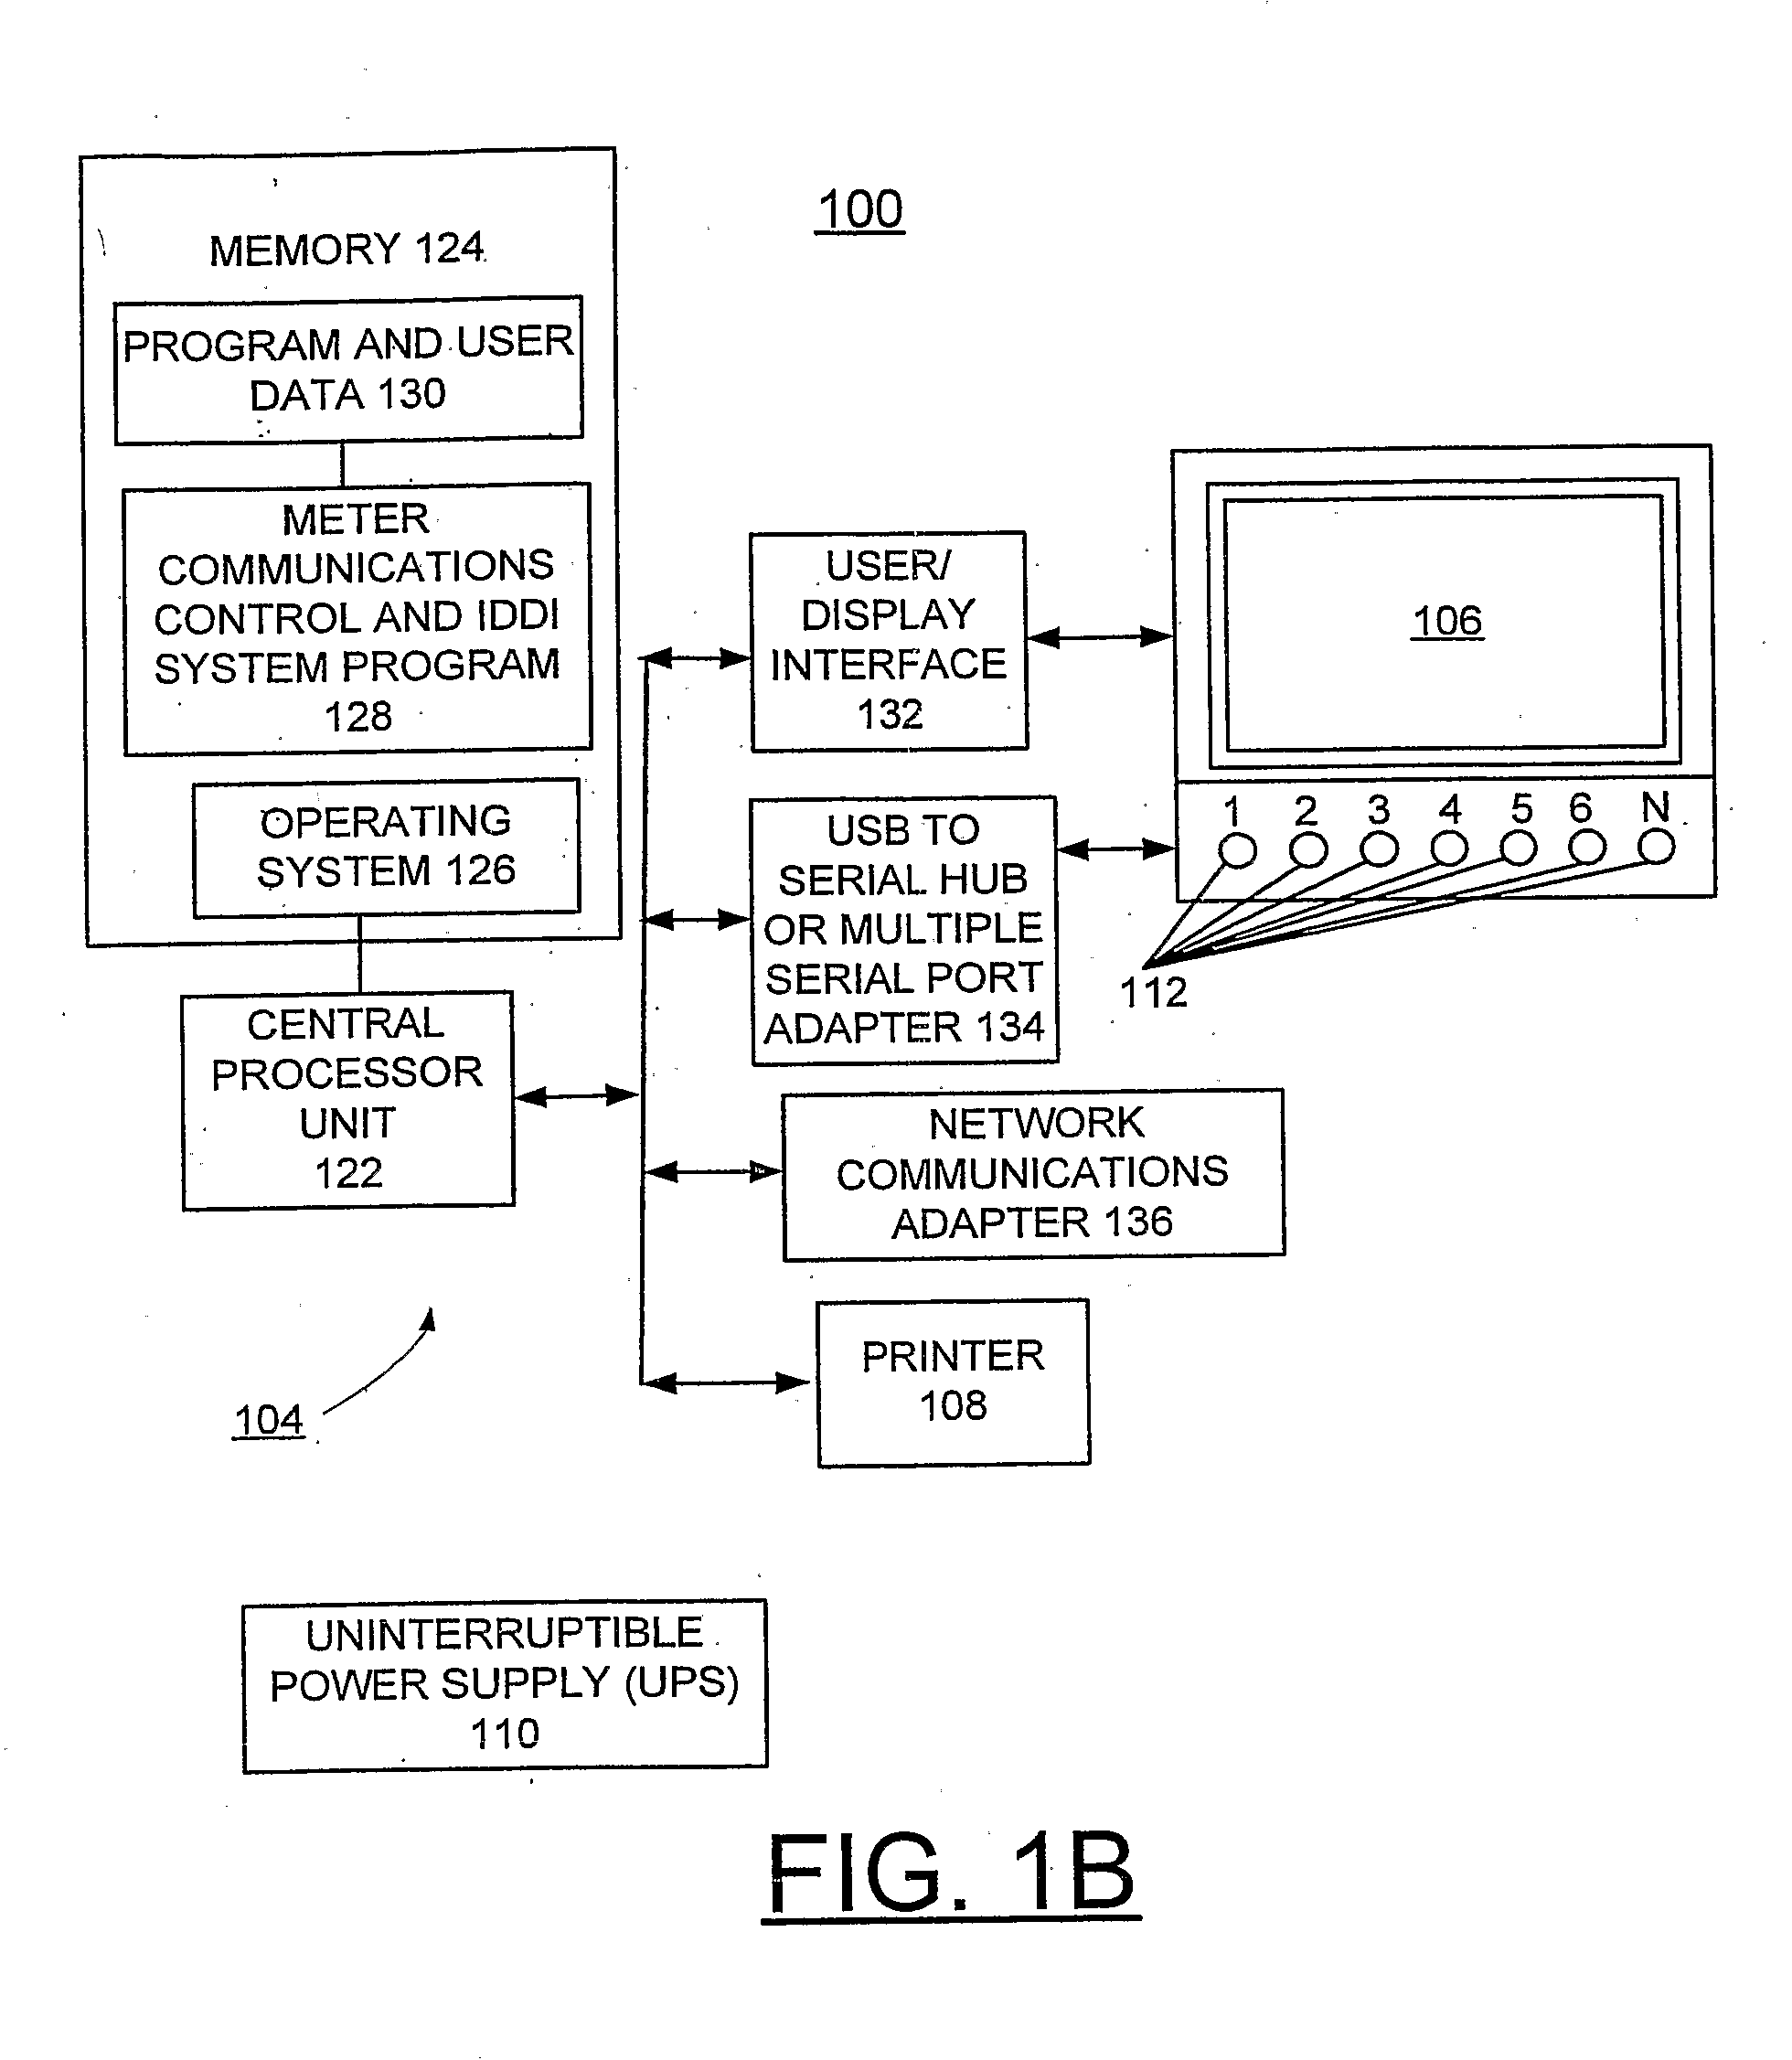 Method and Apparatus for Automatic Detection of Meter Connection and Transfer of Data